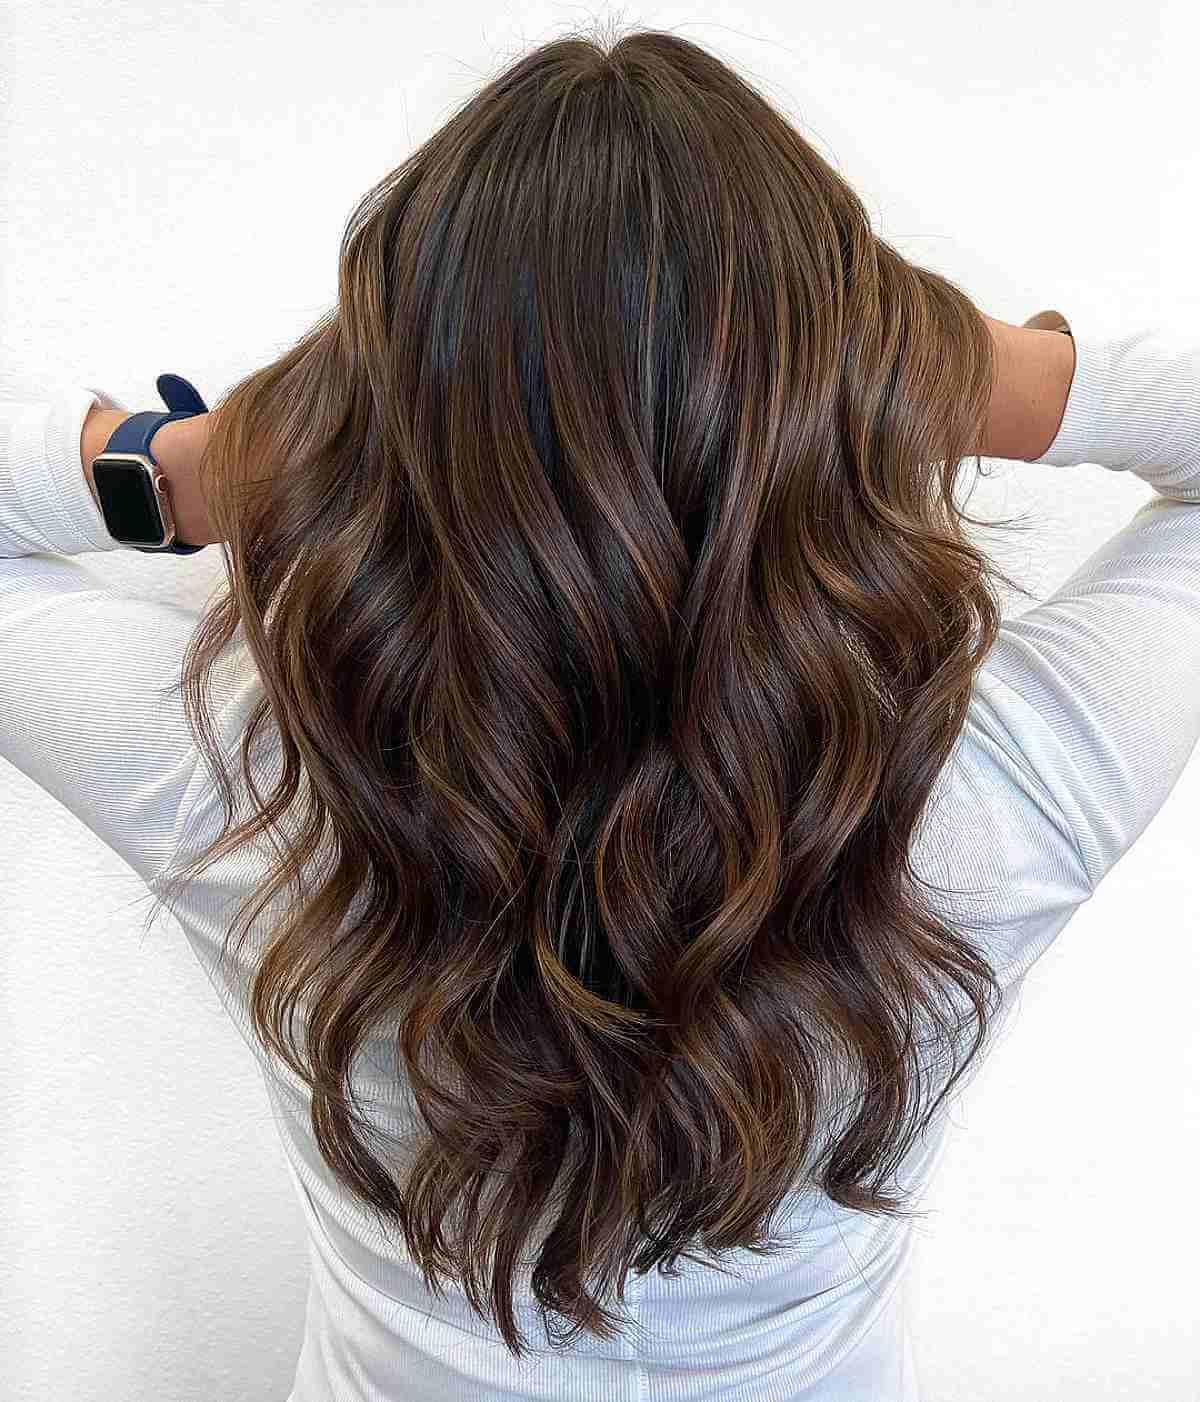 Discover 76+ most beautiful hair color latest